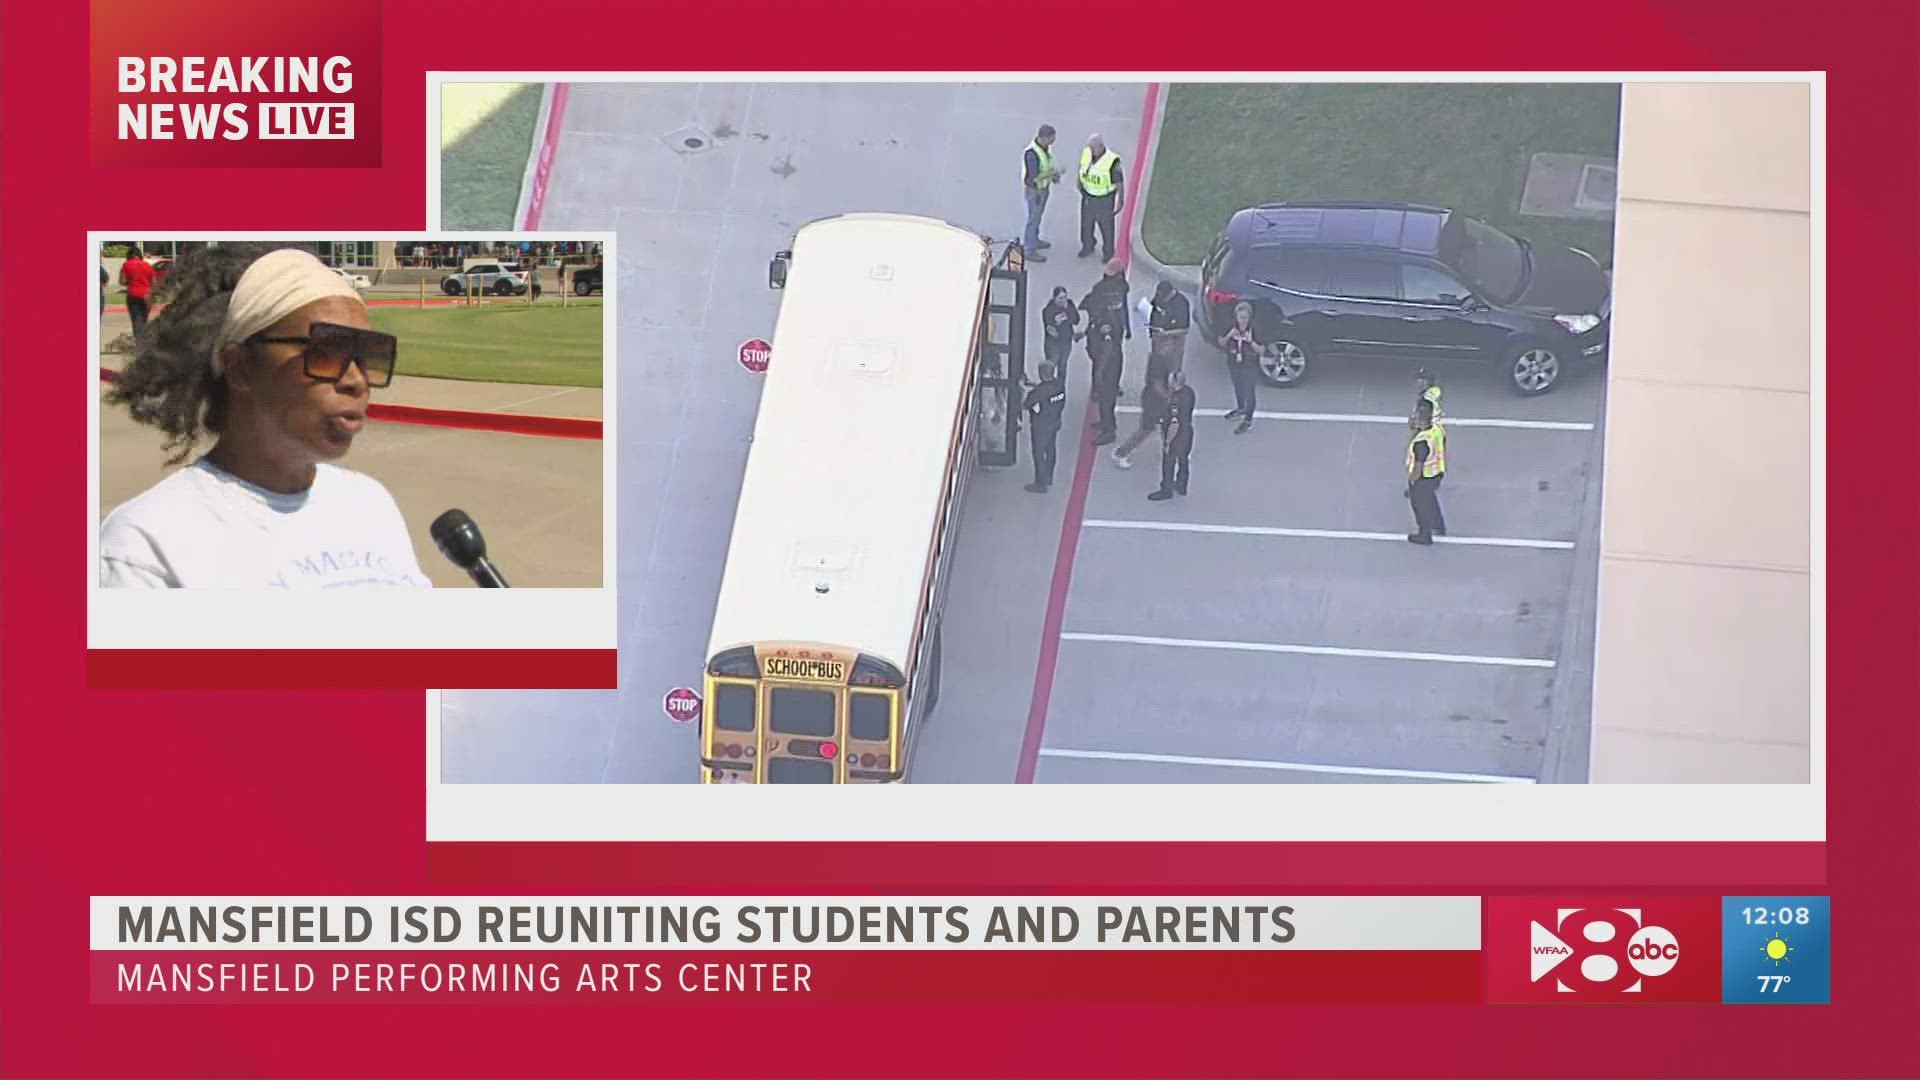 Authorities said four people were shot after a gunman entered the school and opened fire.